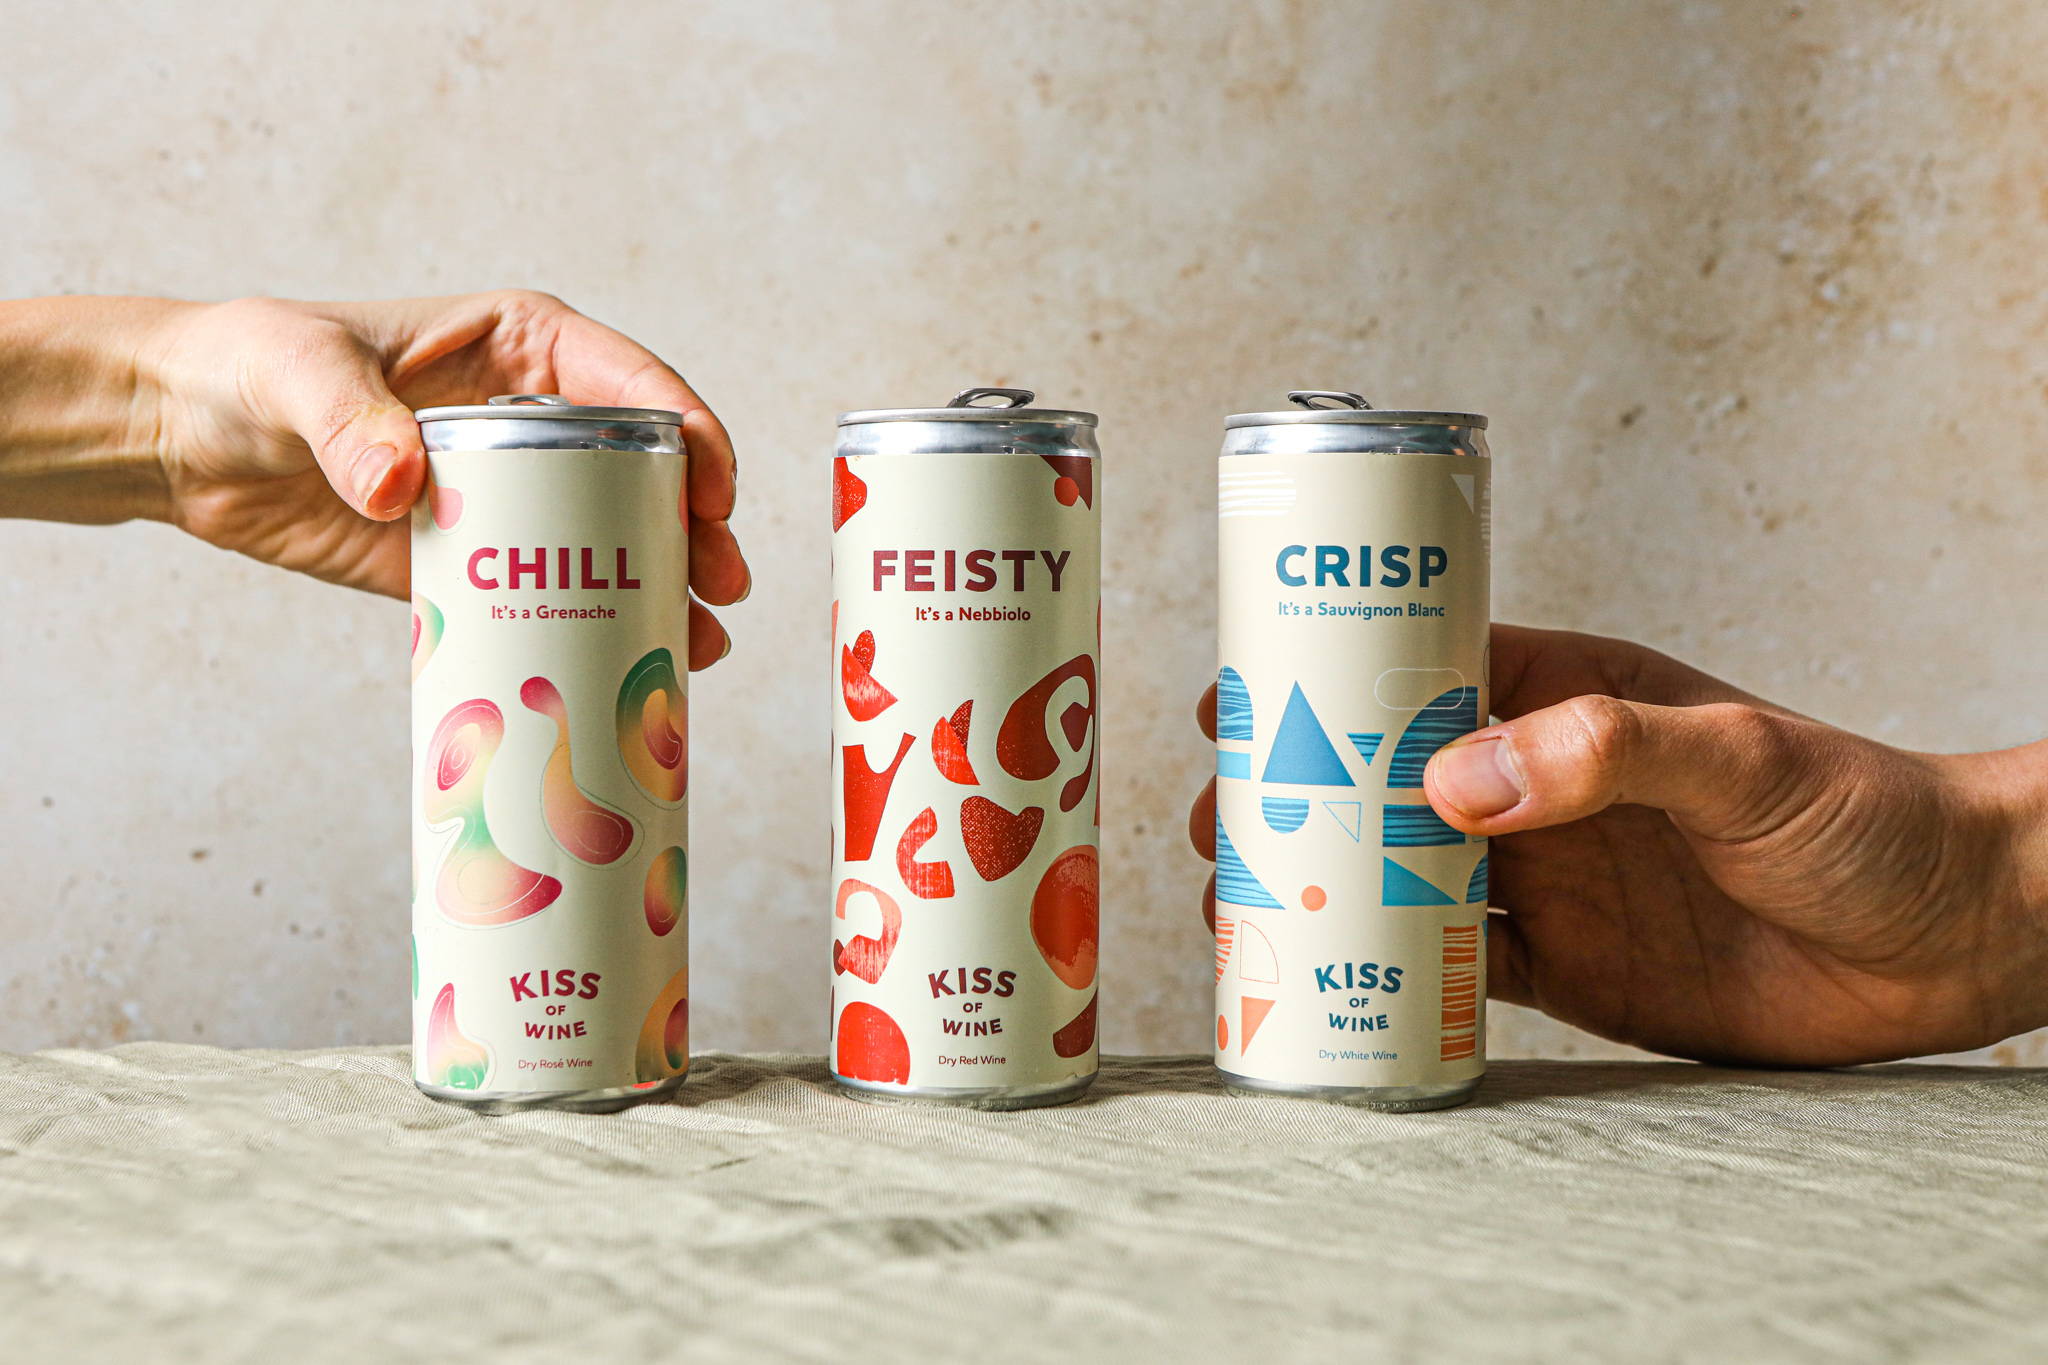 Three types of opened canned wine including Chill rose, Feisty Nebbiolo and Crisp Sauvignon Blanc from Kiss of Wine.